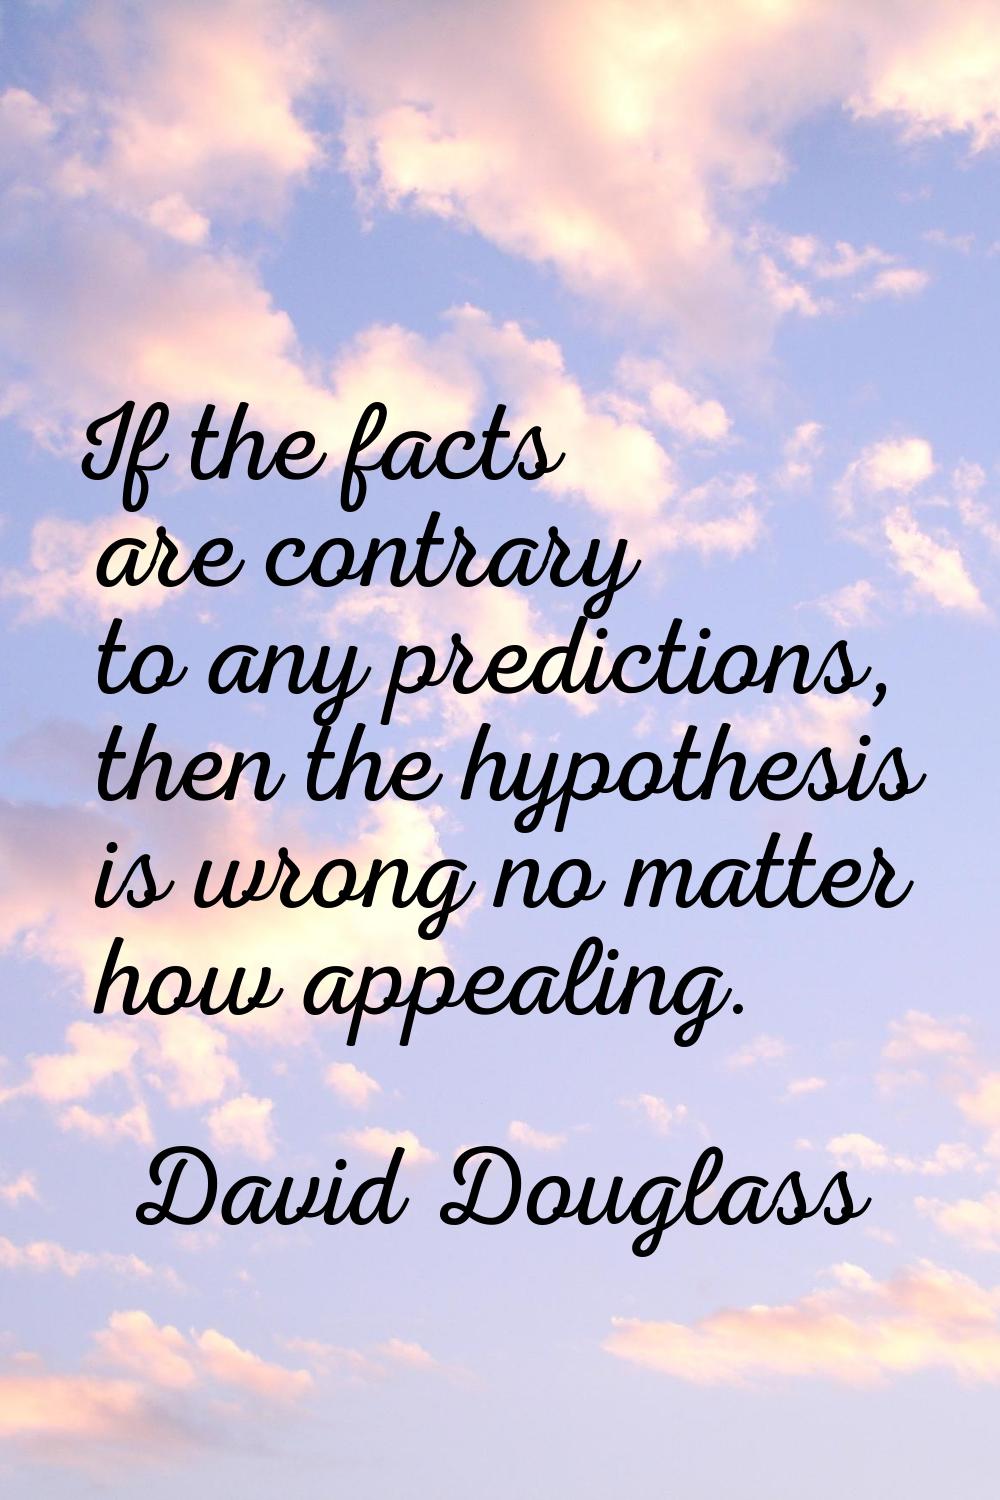 If the facts are contrary to any predictions, then the hypothesis is wrong no matter how appealing.